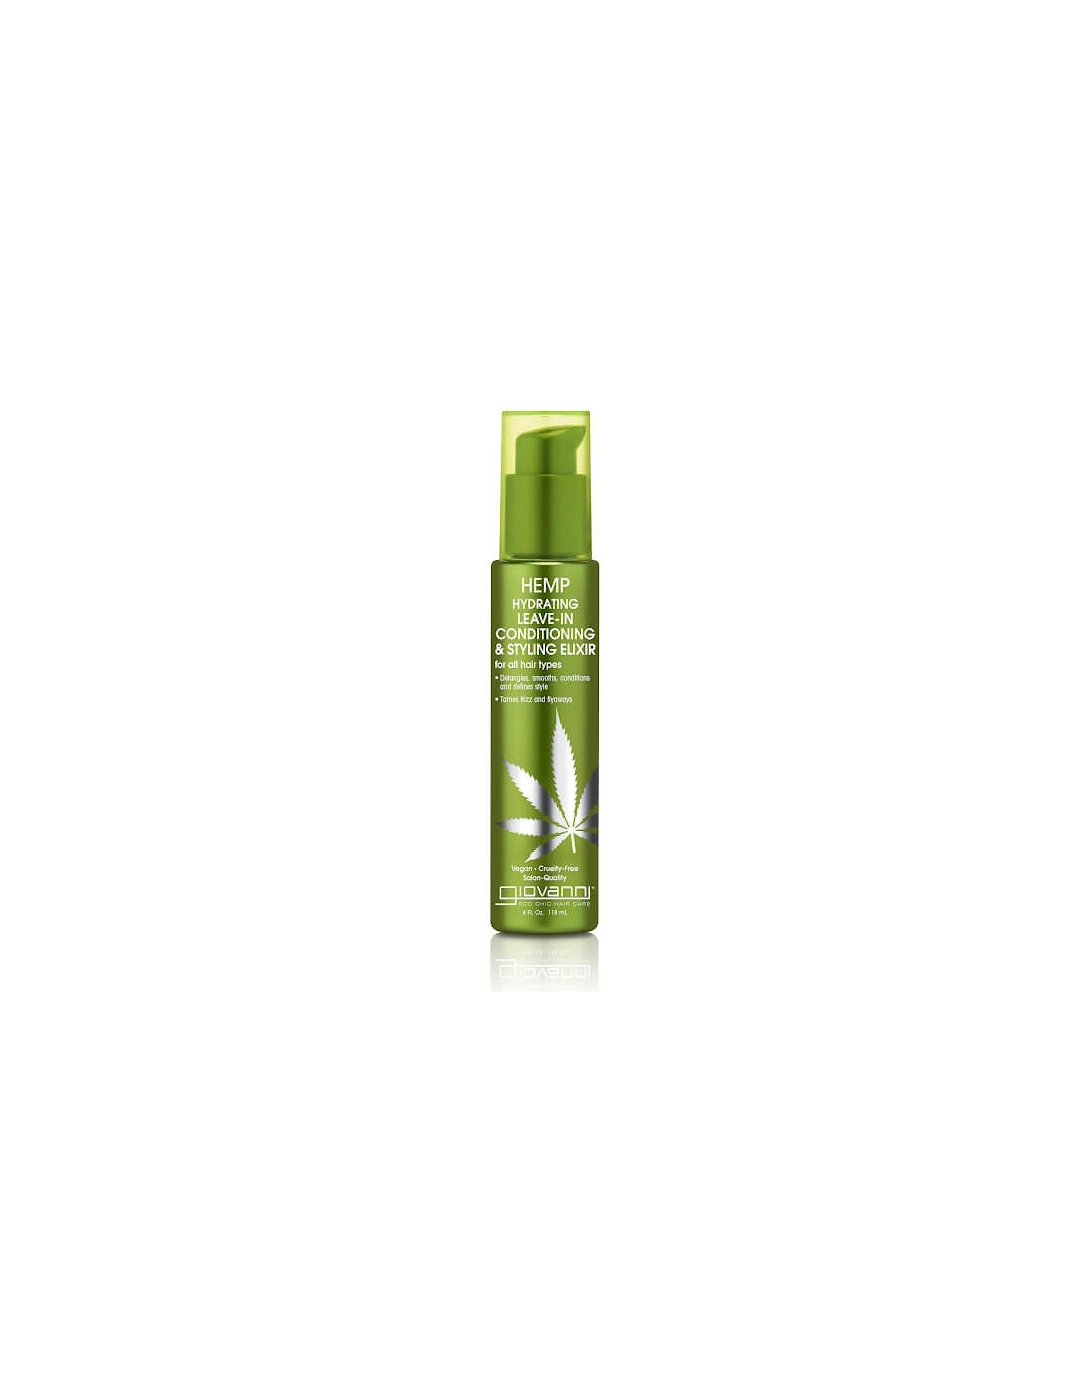 Hemp Hydrating Leave-in Conditioning and Styling Elixir 118ml - Giovanni, 2 of 1